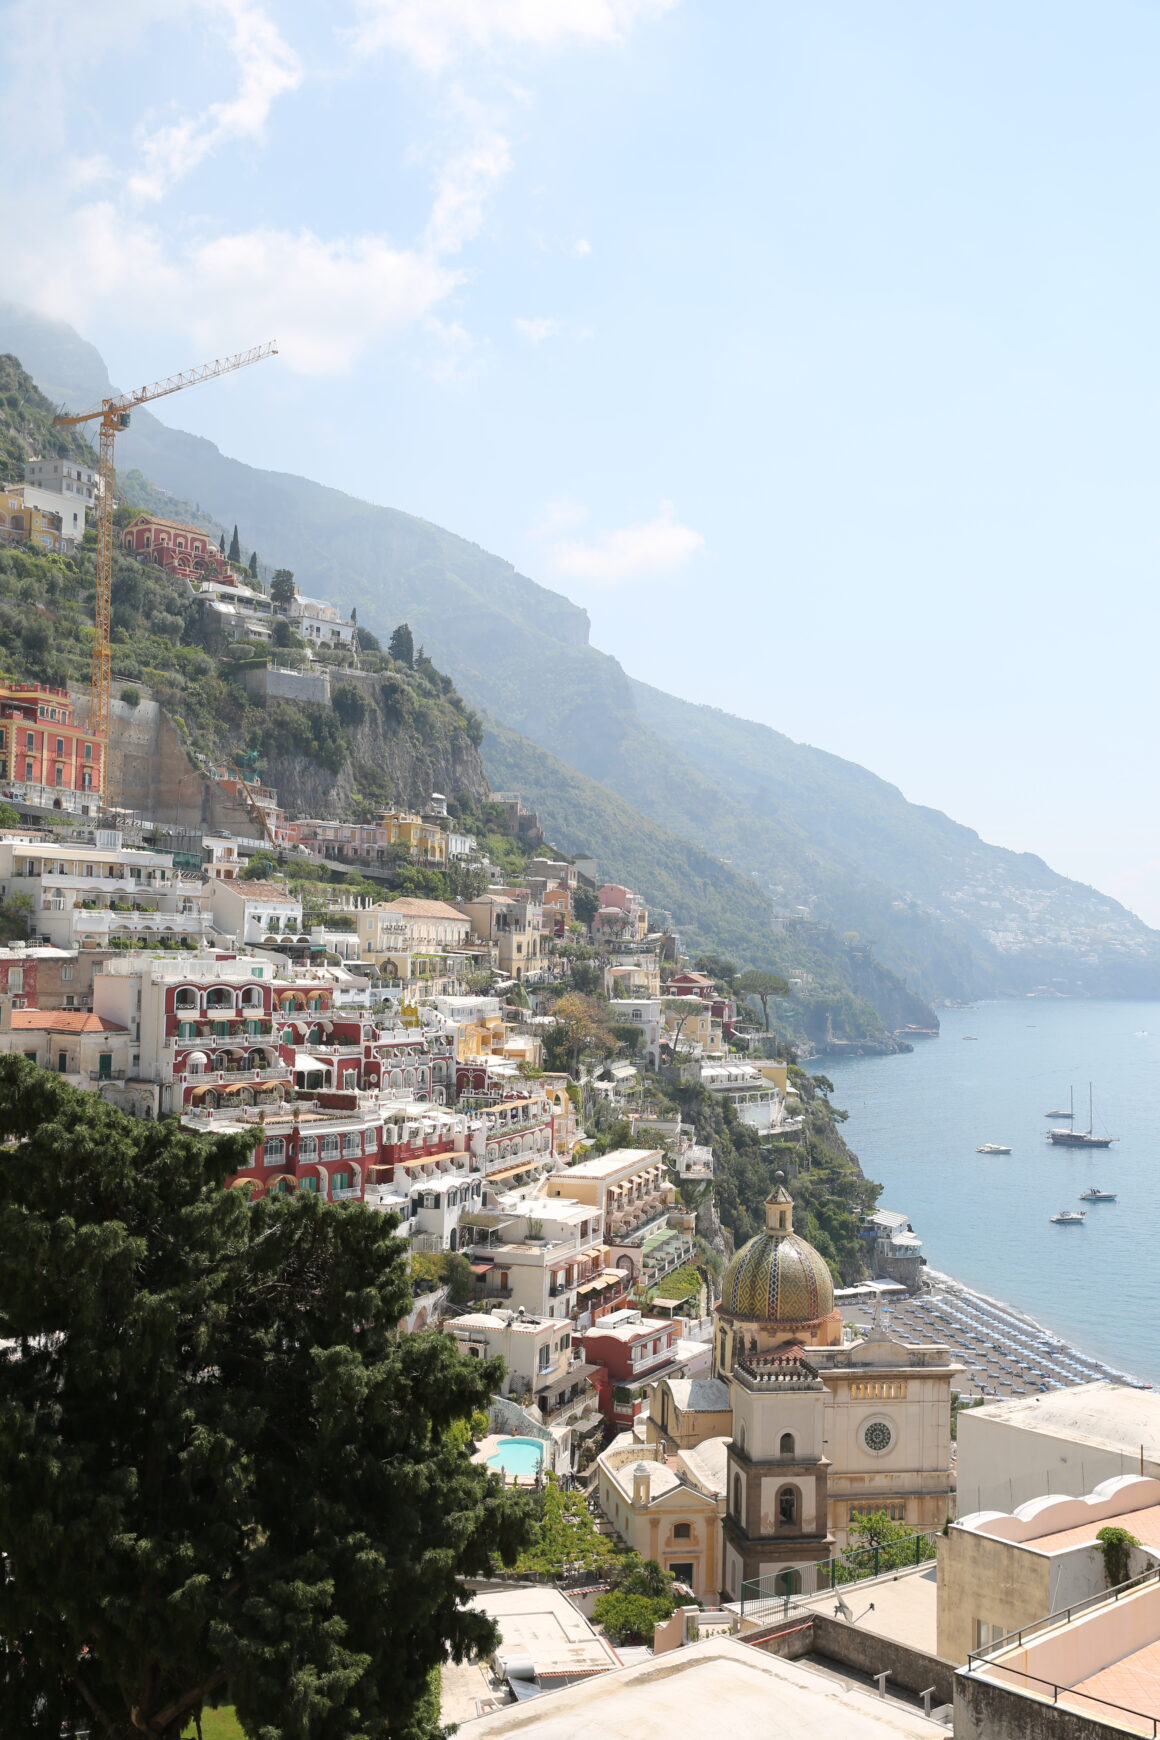 A view of homes on a hill in Positano, Italy